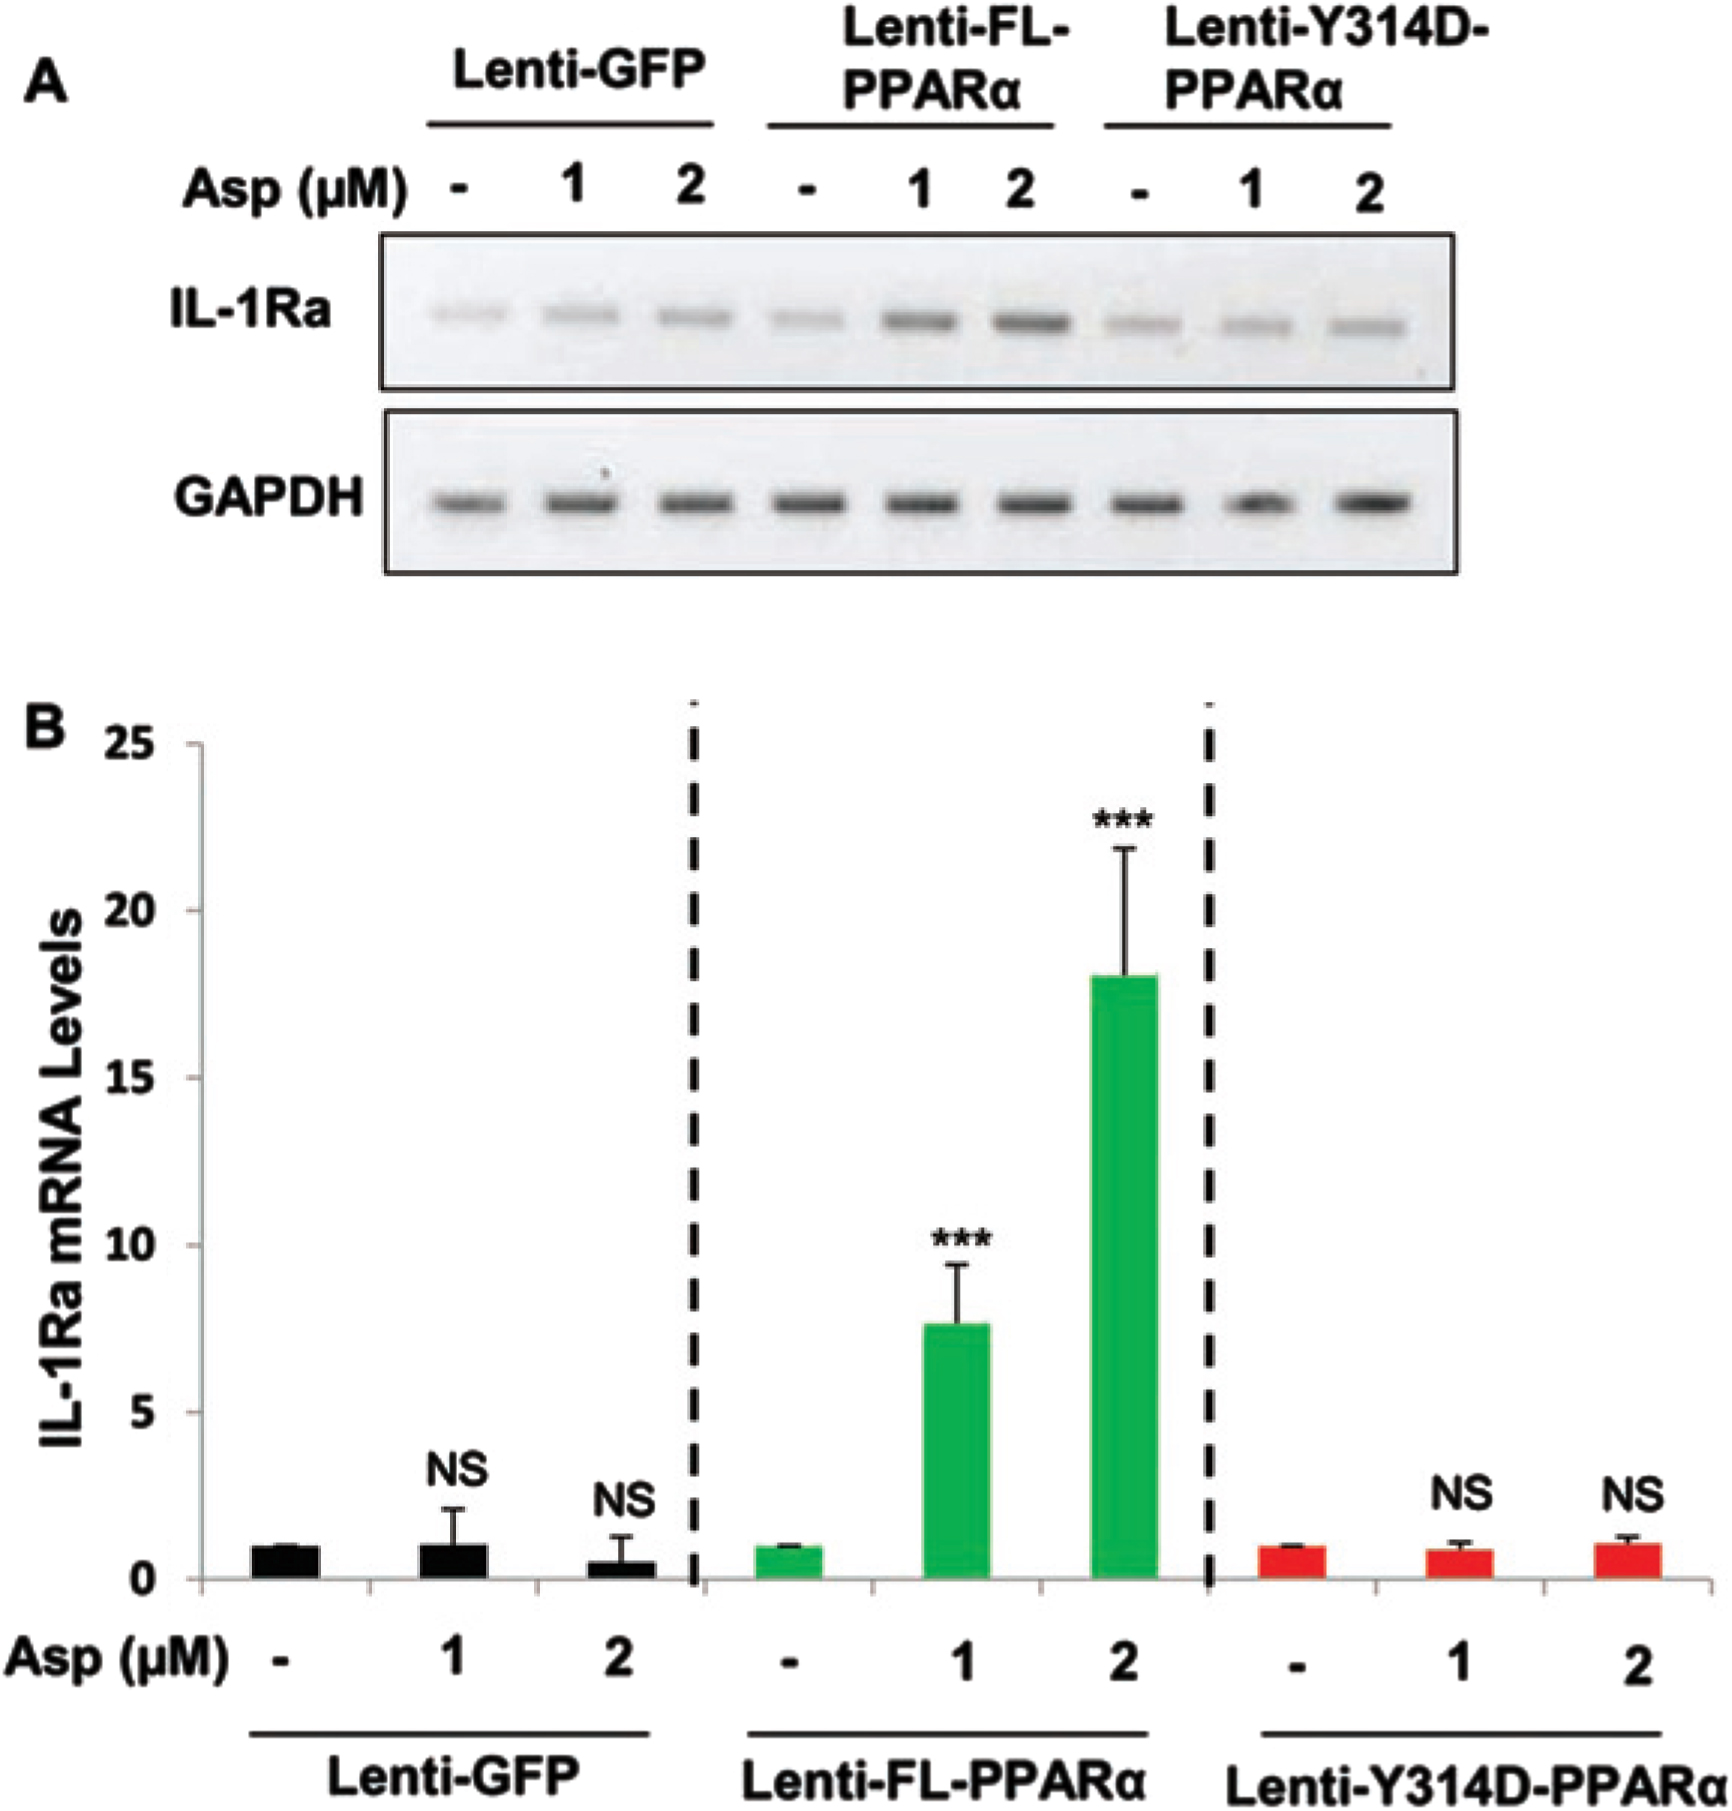 Aspirin induces IL-1Ra in PPARα null mouse astrocytes transduced by full length PPARα, but not Y314D mutated PPARα. PPARα-null mouse astrocytes were transduced with lentivirions containing GFP (vector), FL-PPARα, and Y314D- PPARα for 48 h followed by treatment with 1 and 2μM Aspirin for 2 h. Then check the mRNA expression in aspirin treated PPARα -null astroglial cell transduced with lentivirions containing FL-PPARα (FL-PPARα) and Y314D- PPARα. A, B) An increase in IL-1Ra, mRNA was significant in FL-PPARα transduced astrocytes with p < 0.001, but not lentivirions containing GFP or Y314D-PPARα. Significance of mean between control and aspirin-treated cells was analyzed by a two-tailed paired t-test.